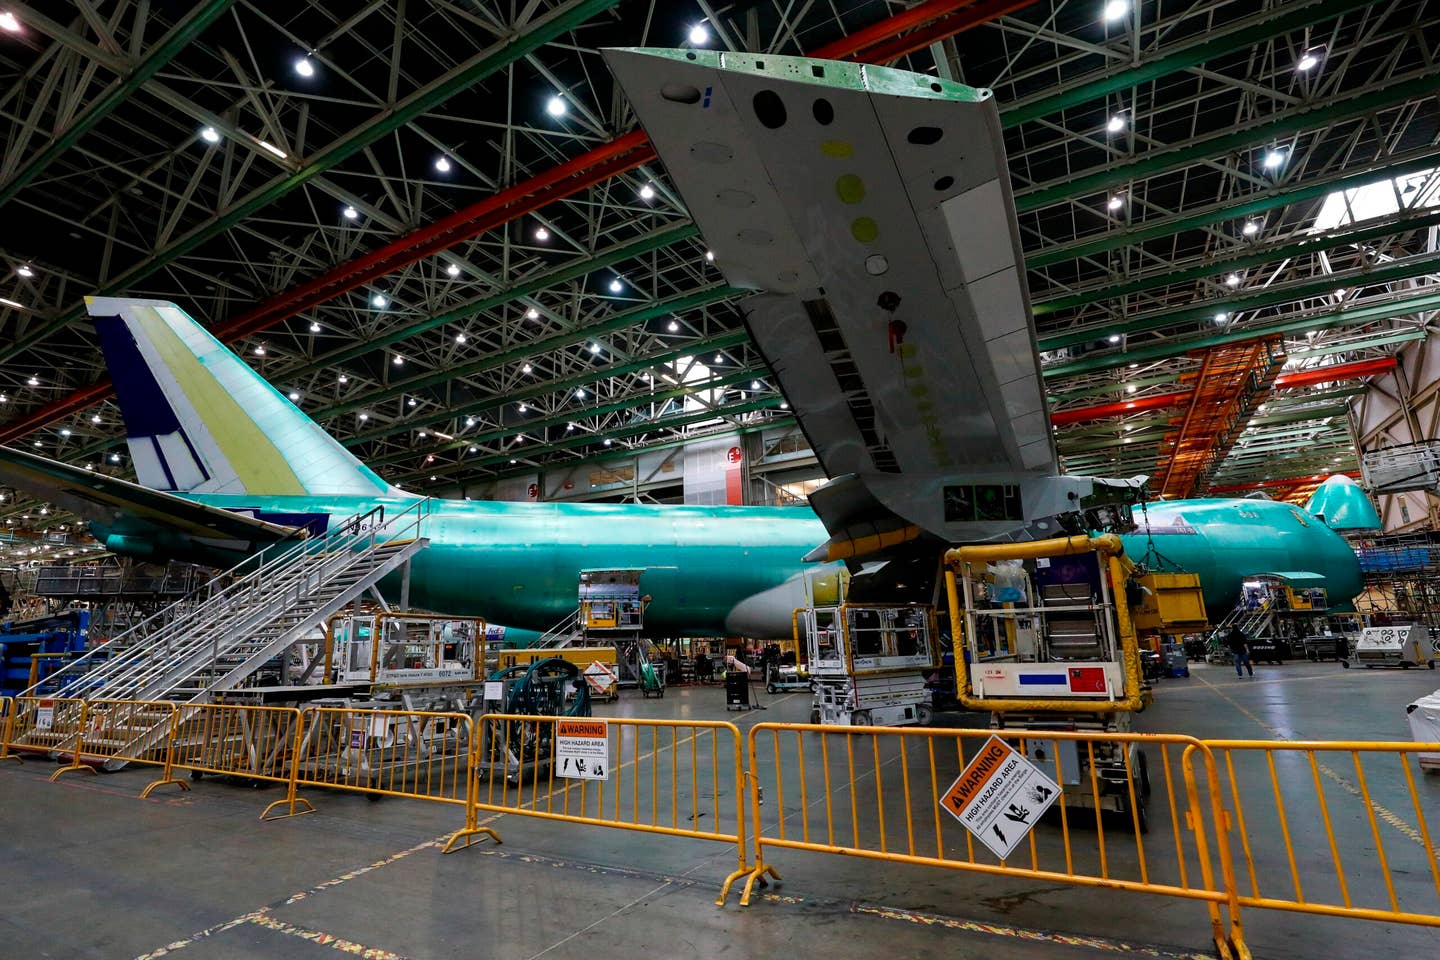 Workers assemble the third to last Boeing 747 aircraft at Boeing's Everett Production Facility Wednesday, June 15, 2022 in Everett, Wash. (Jennifer Buchanan/The Seattle Times via AP, Pool)